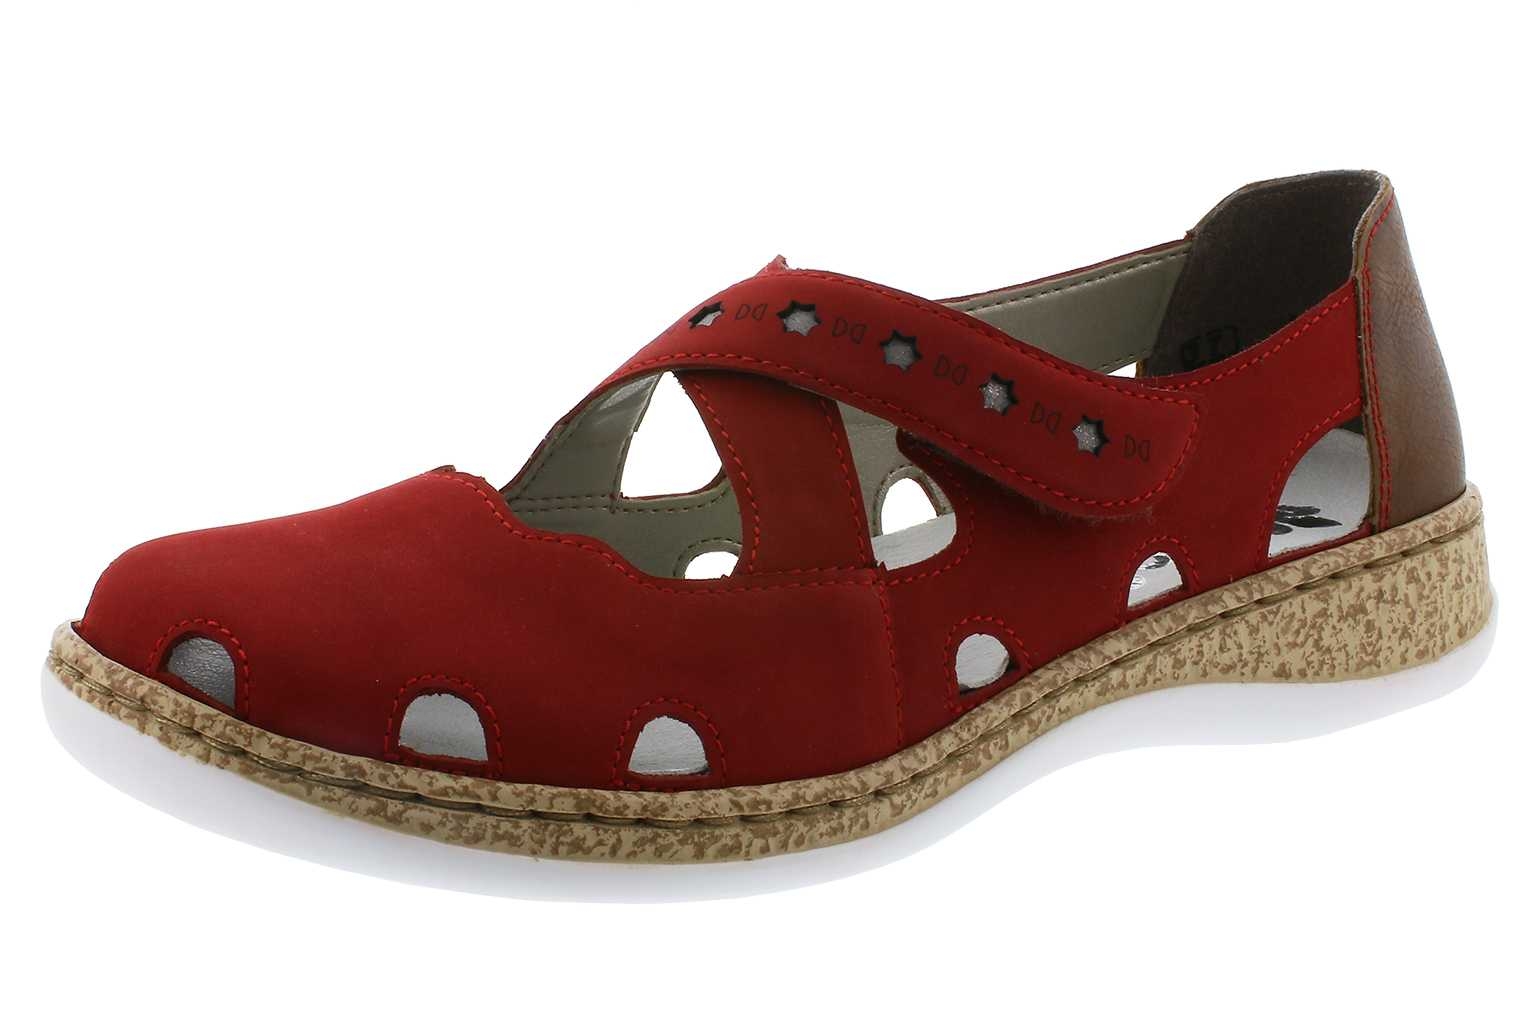 46356 RIEKER - WOMENS SHOES-SHOES - low to flat : Shirley's Shoes ...